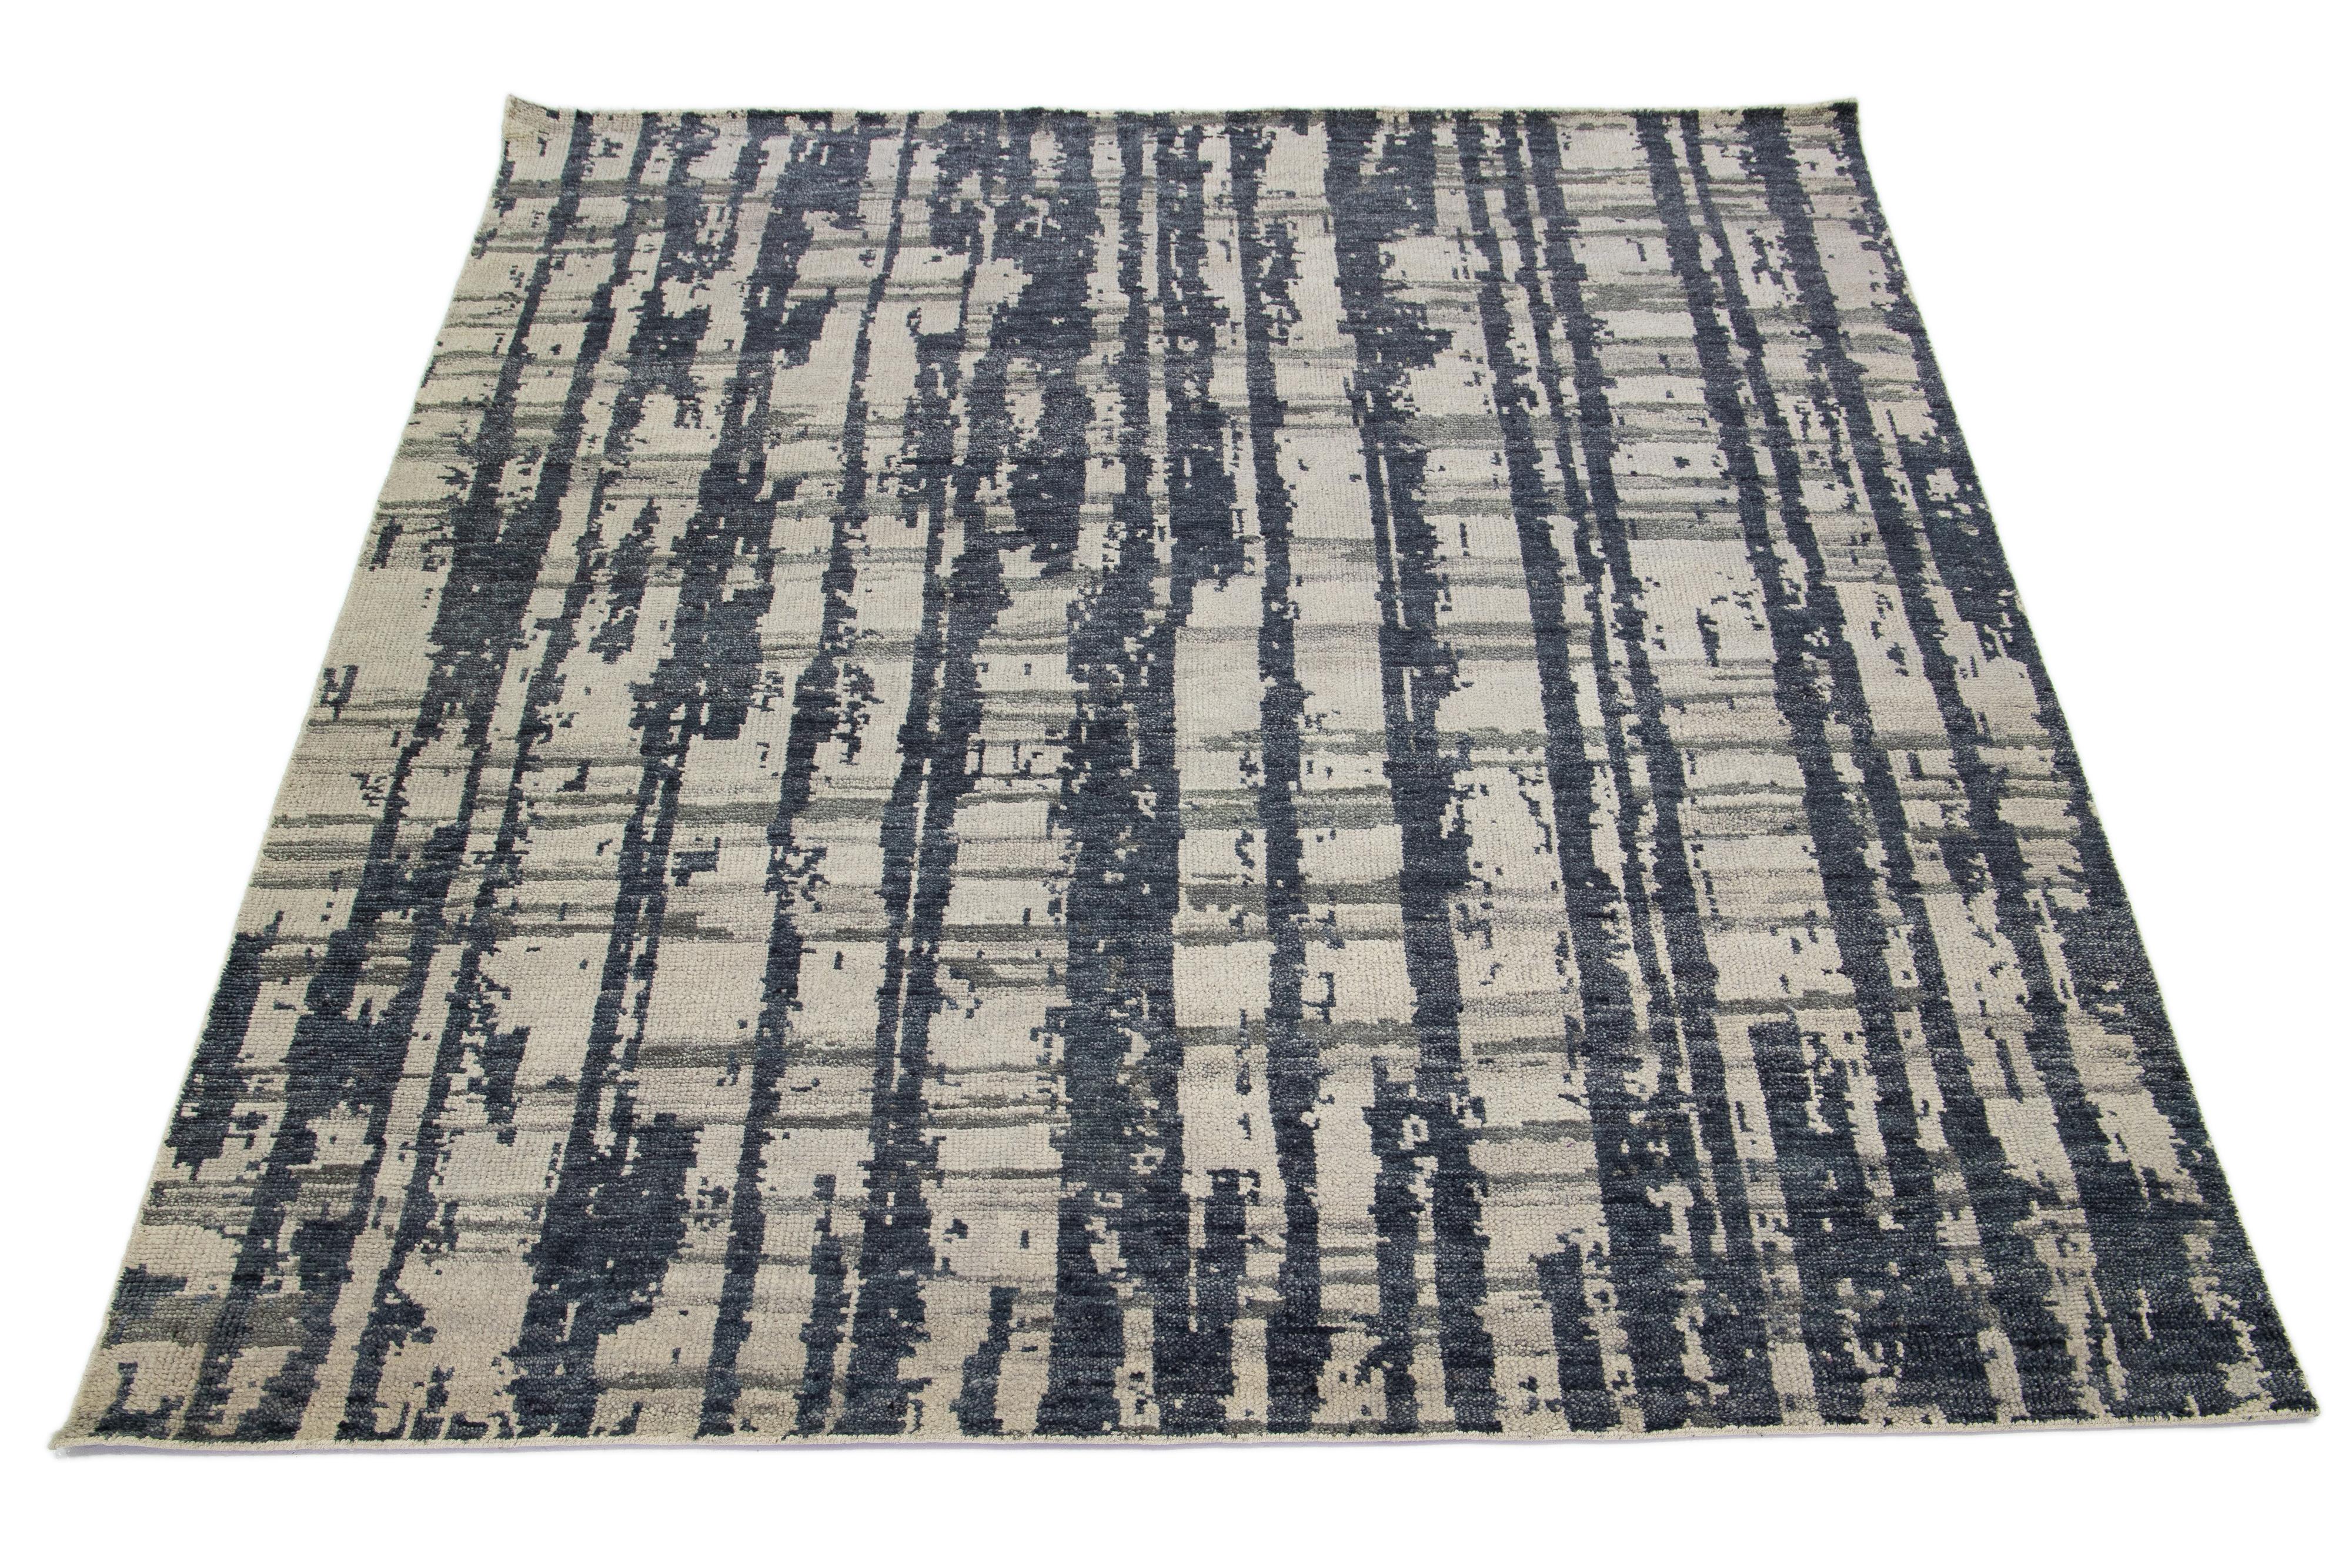 Beautiful Contemporary Thom Filicia Home Collection rugs. This Indian hand-tufted rug is made of wool and has a beige color field with gray accents all over the design.
Thom Filicia's eye for exquisite detailing and beautiful texture shines through